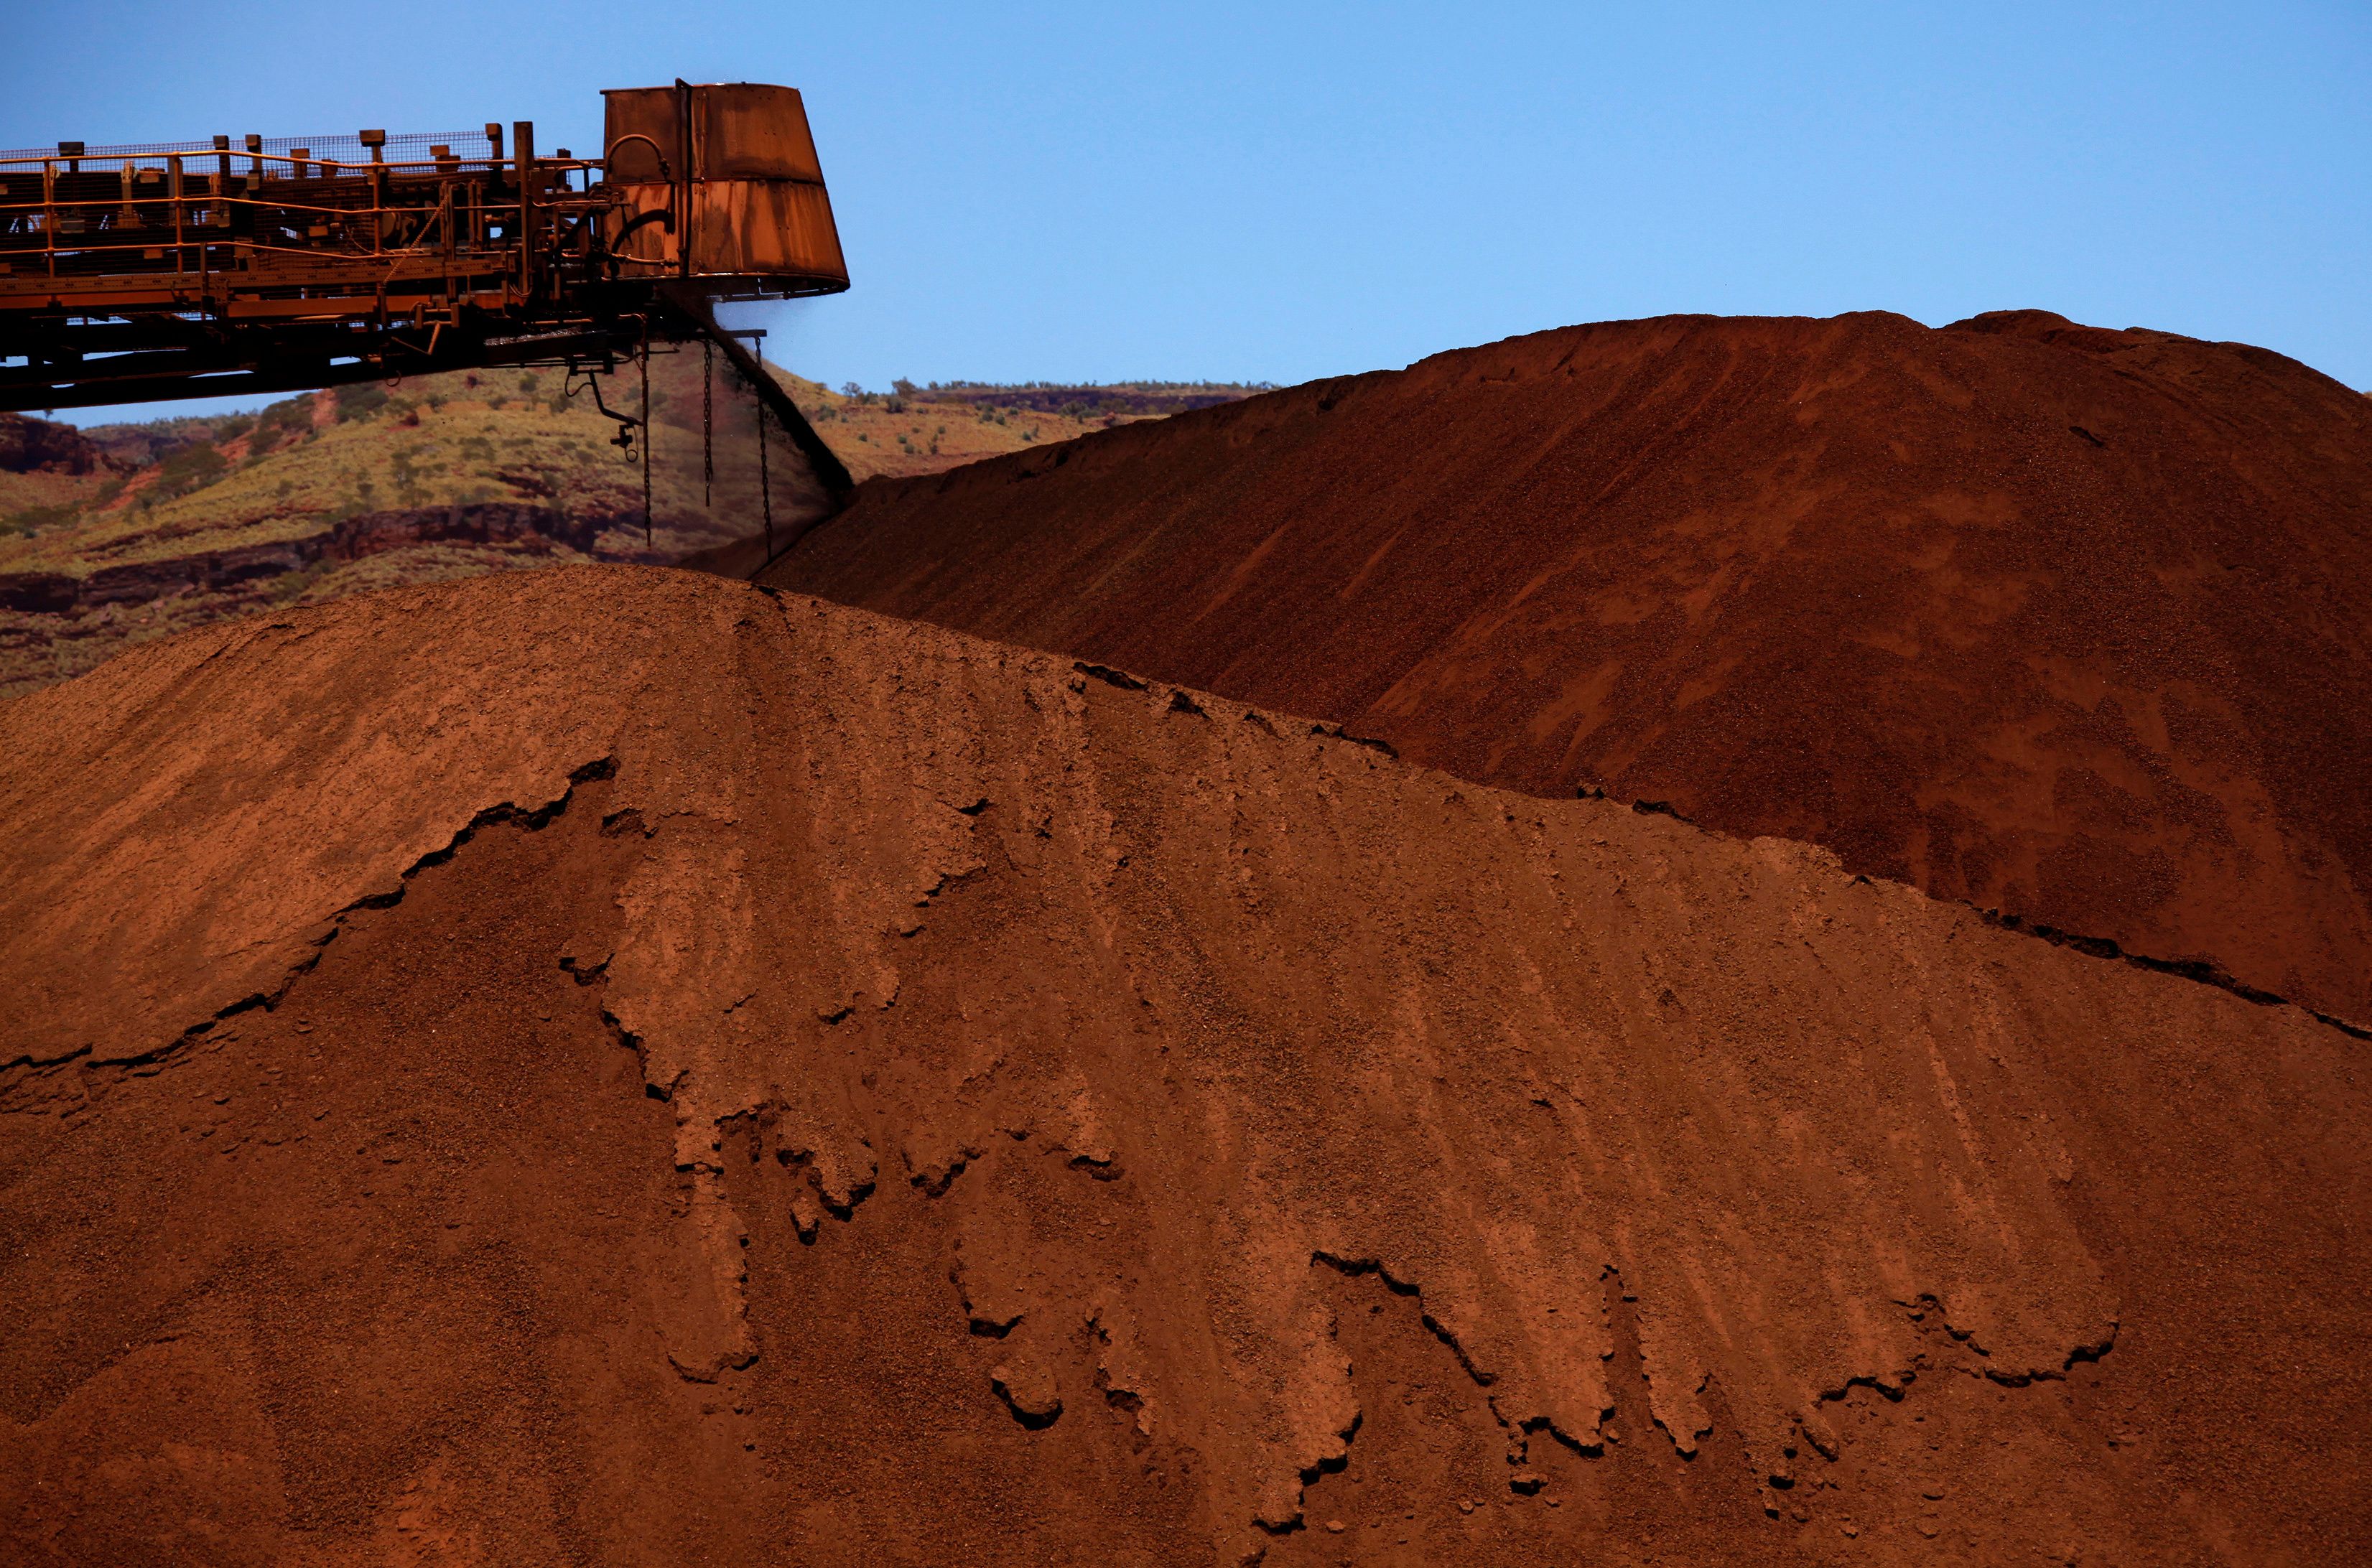 A stacker unloads iron ore onto a pile at a mine located in the Pilbara region of Western Australia December 2, 2013. REUTERS/David Gray